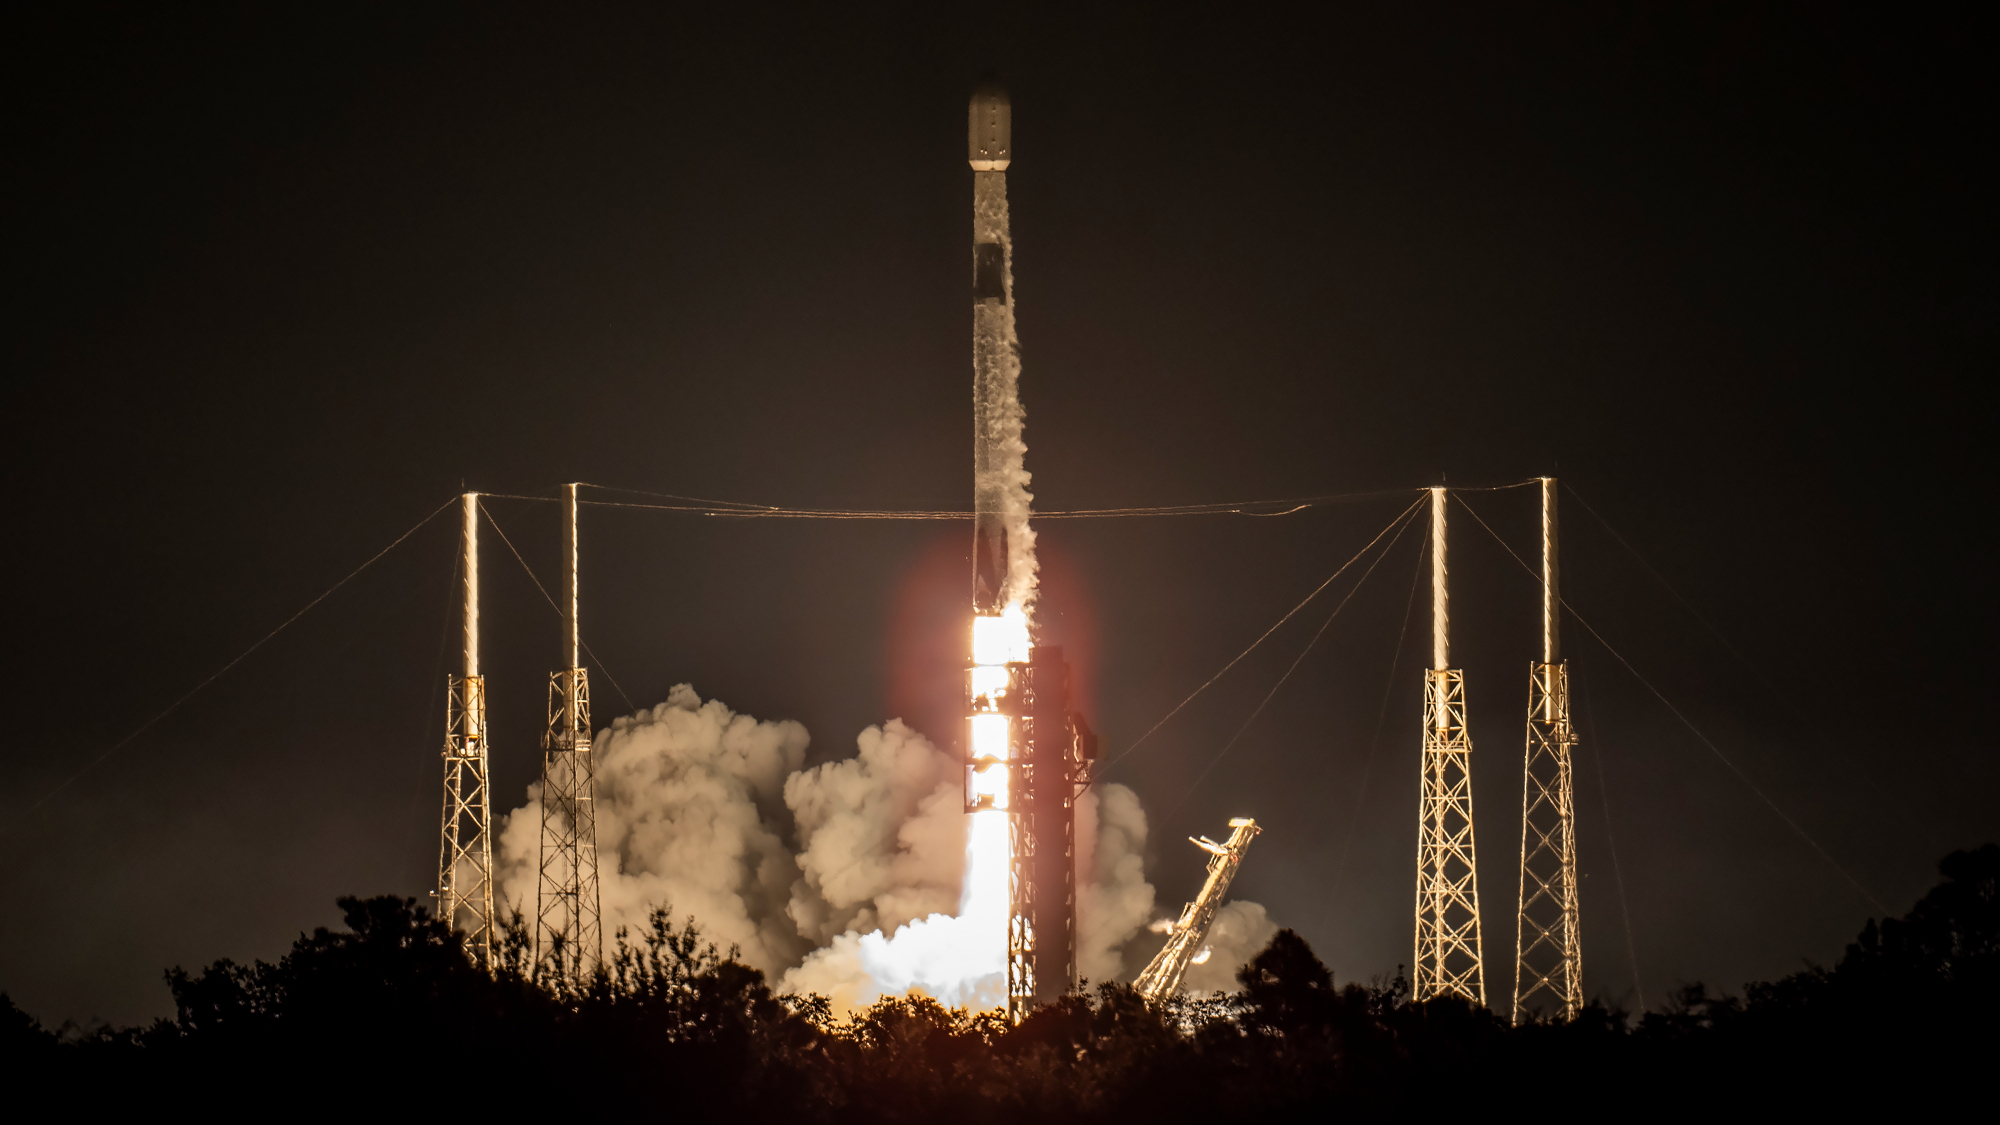  SpaceX launching 23 Starlink satellites to orbit early Aug. 2 